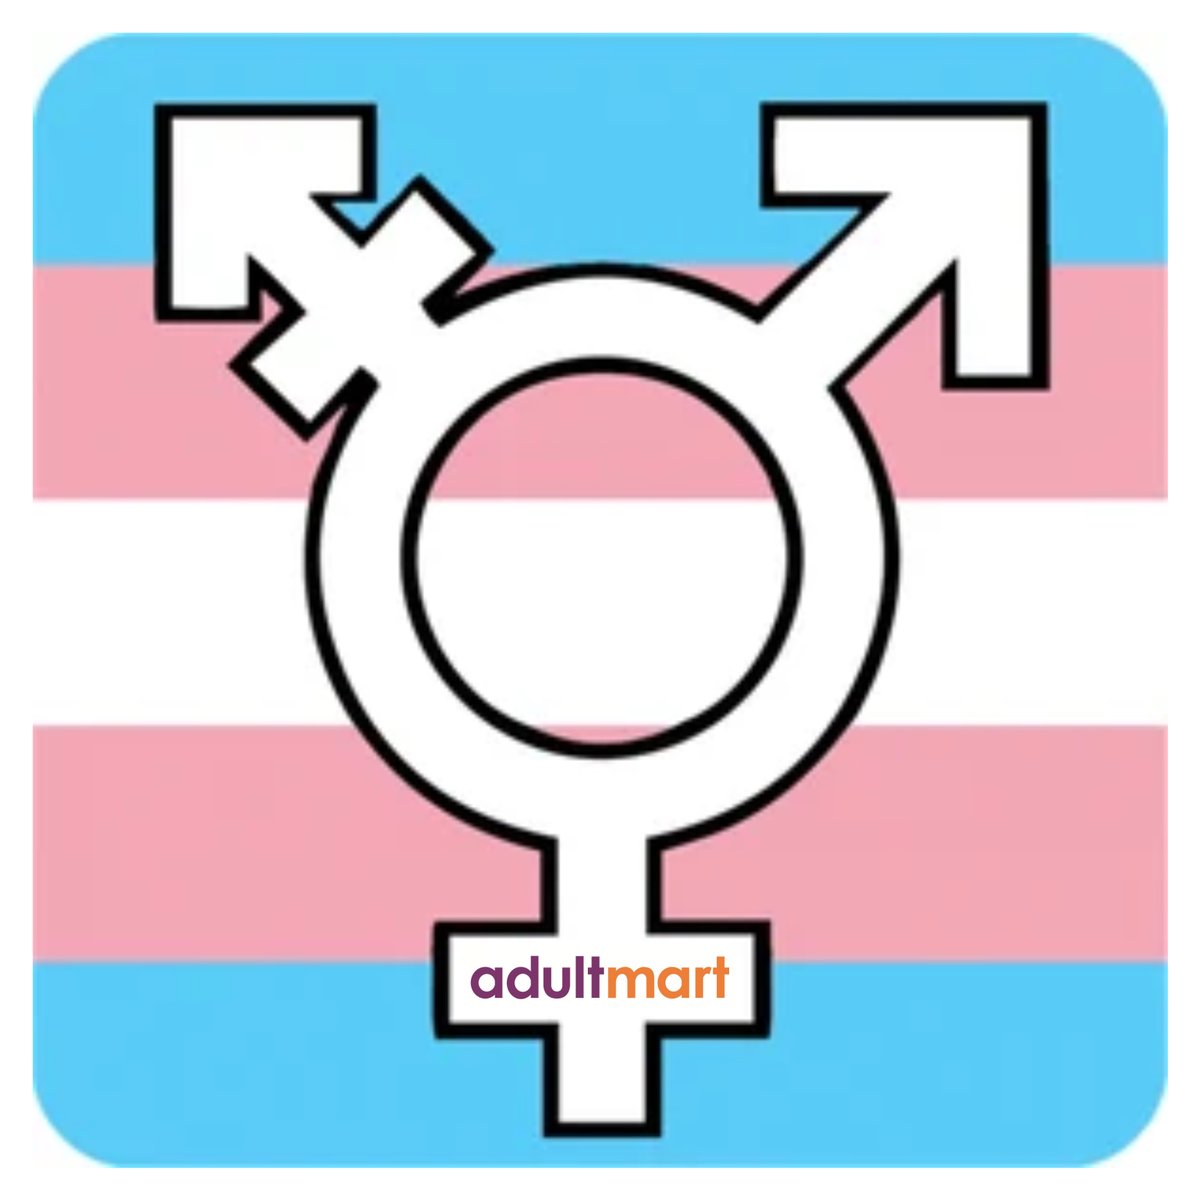 We see you! 💜🧡 #adultmart #loveislove #love #transdayofvisibility #trans #glaad #transweek #twova